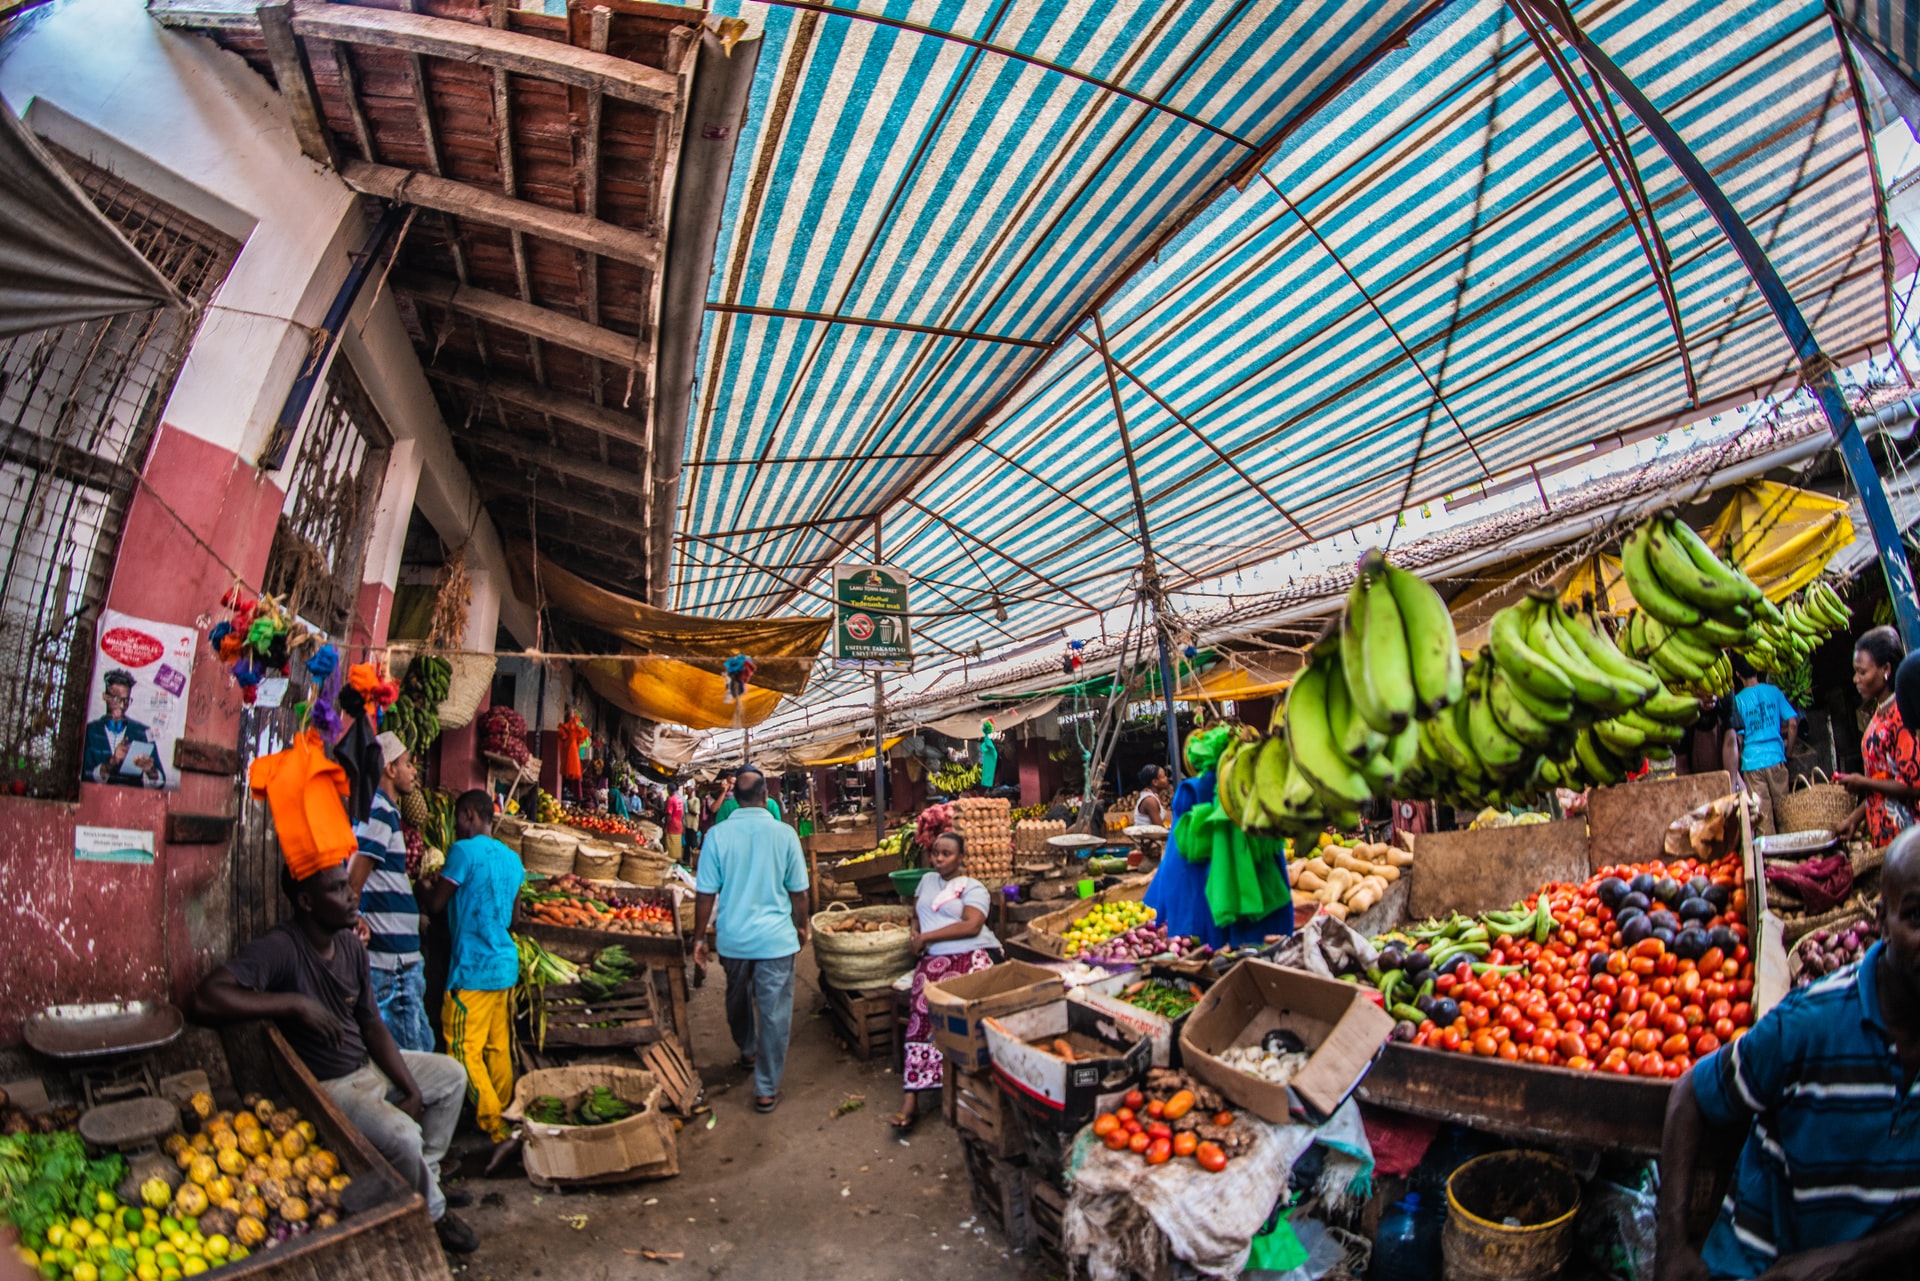 photo of a fruit market with people walking around and fruit for sale in tents